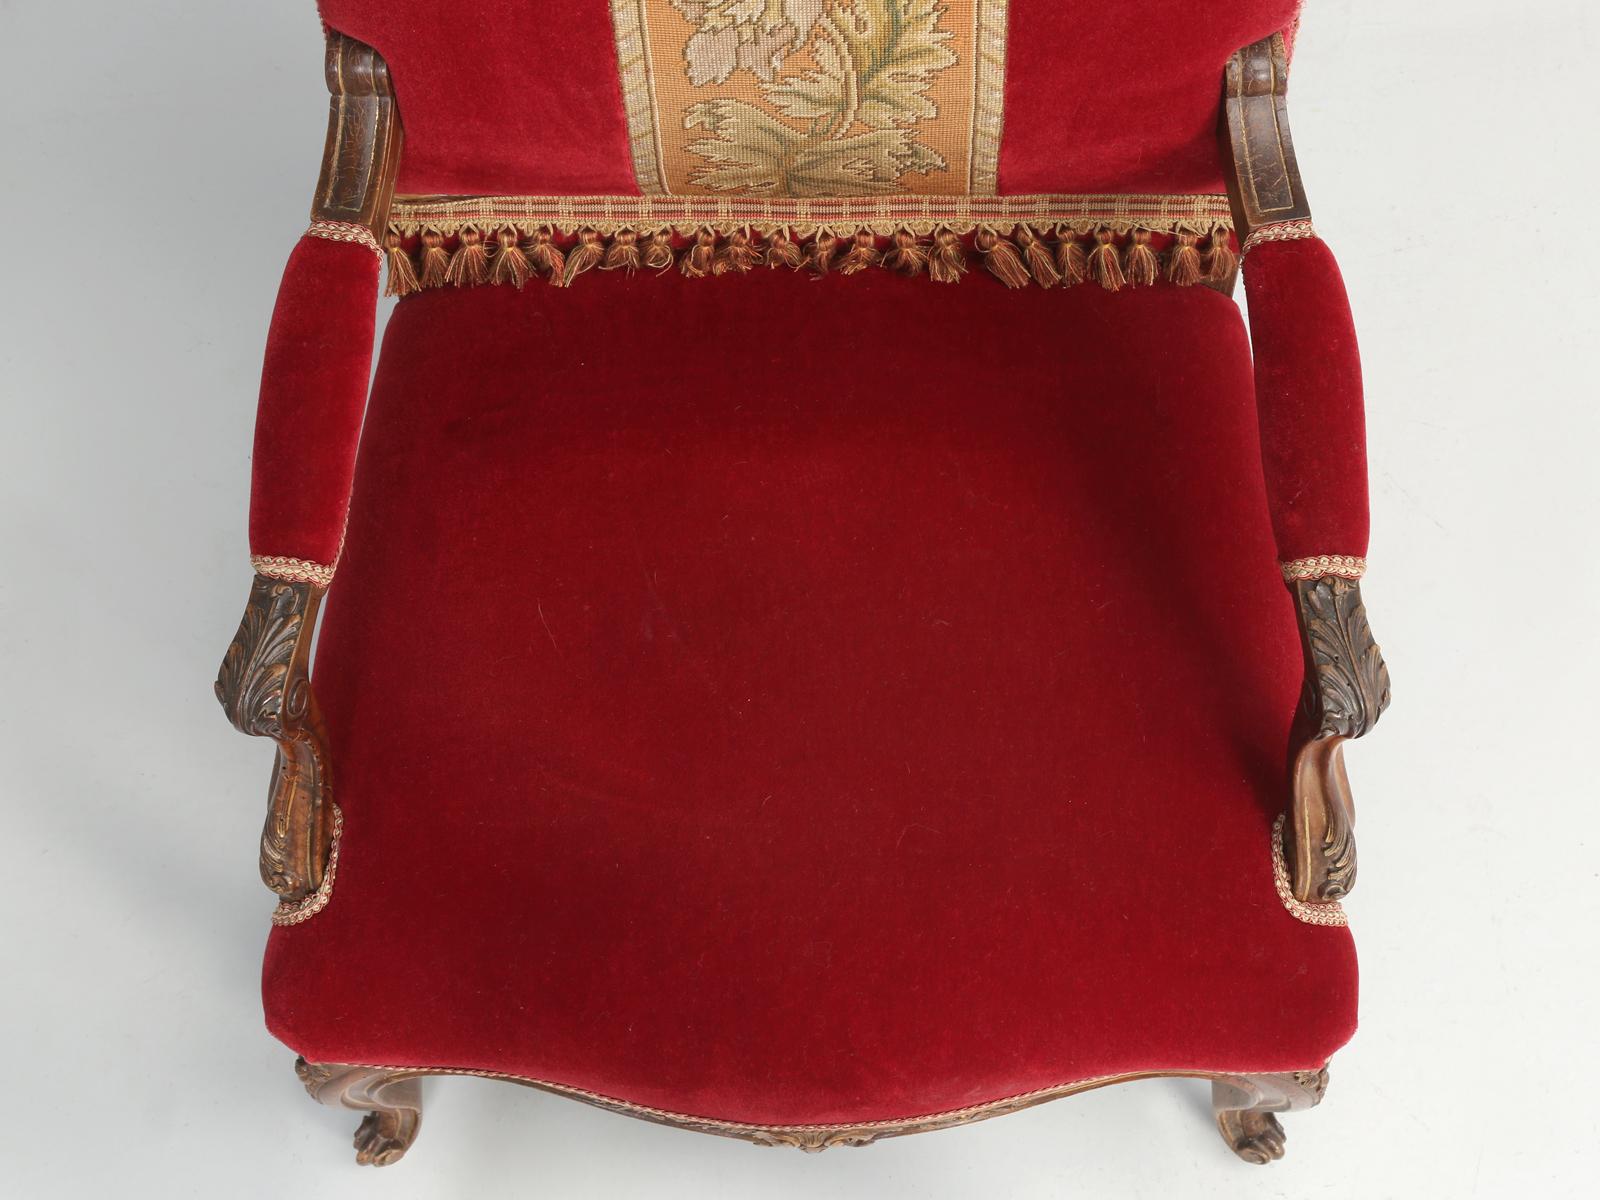 Walnut Antique Italian Louis XV Style Throne Chair or Armchair with Gold Accents